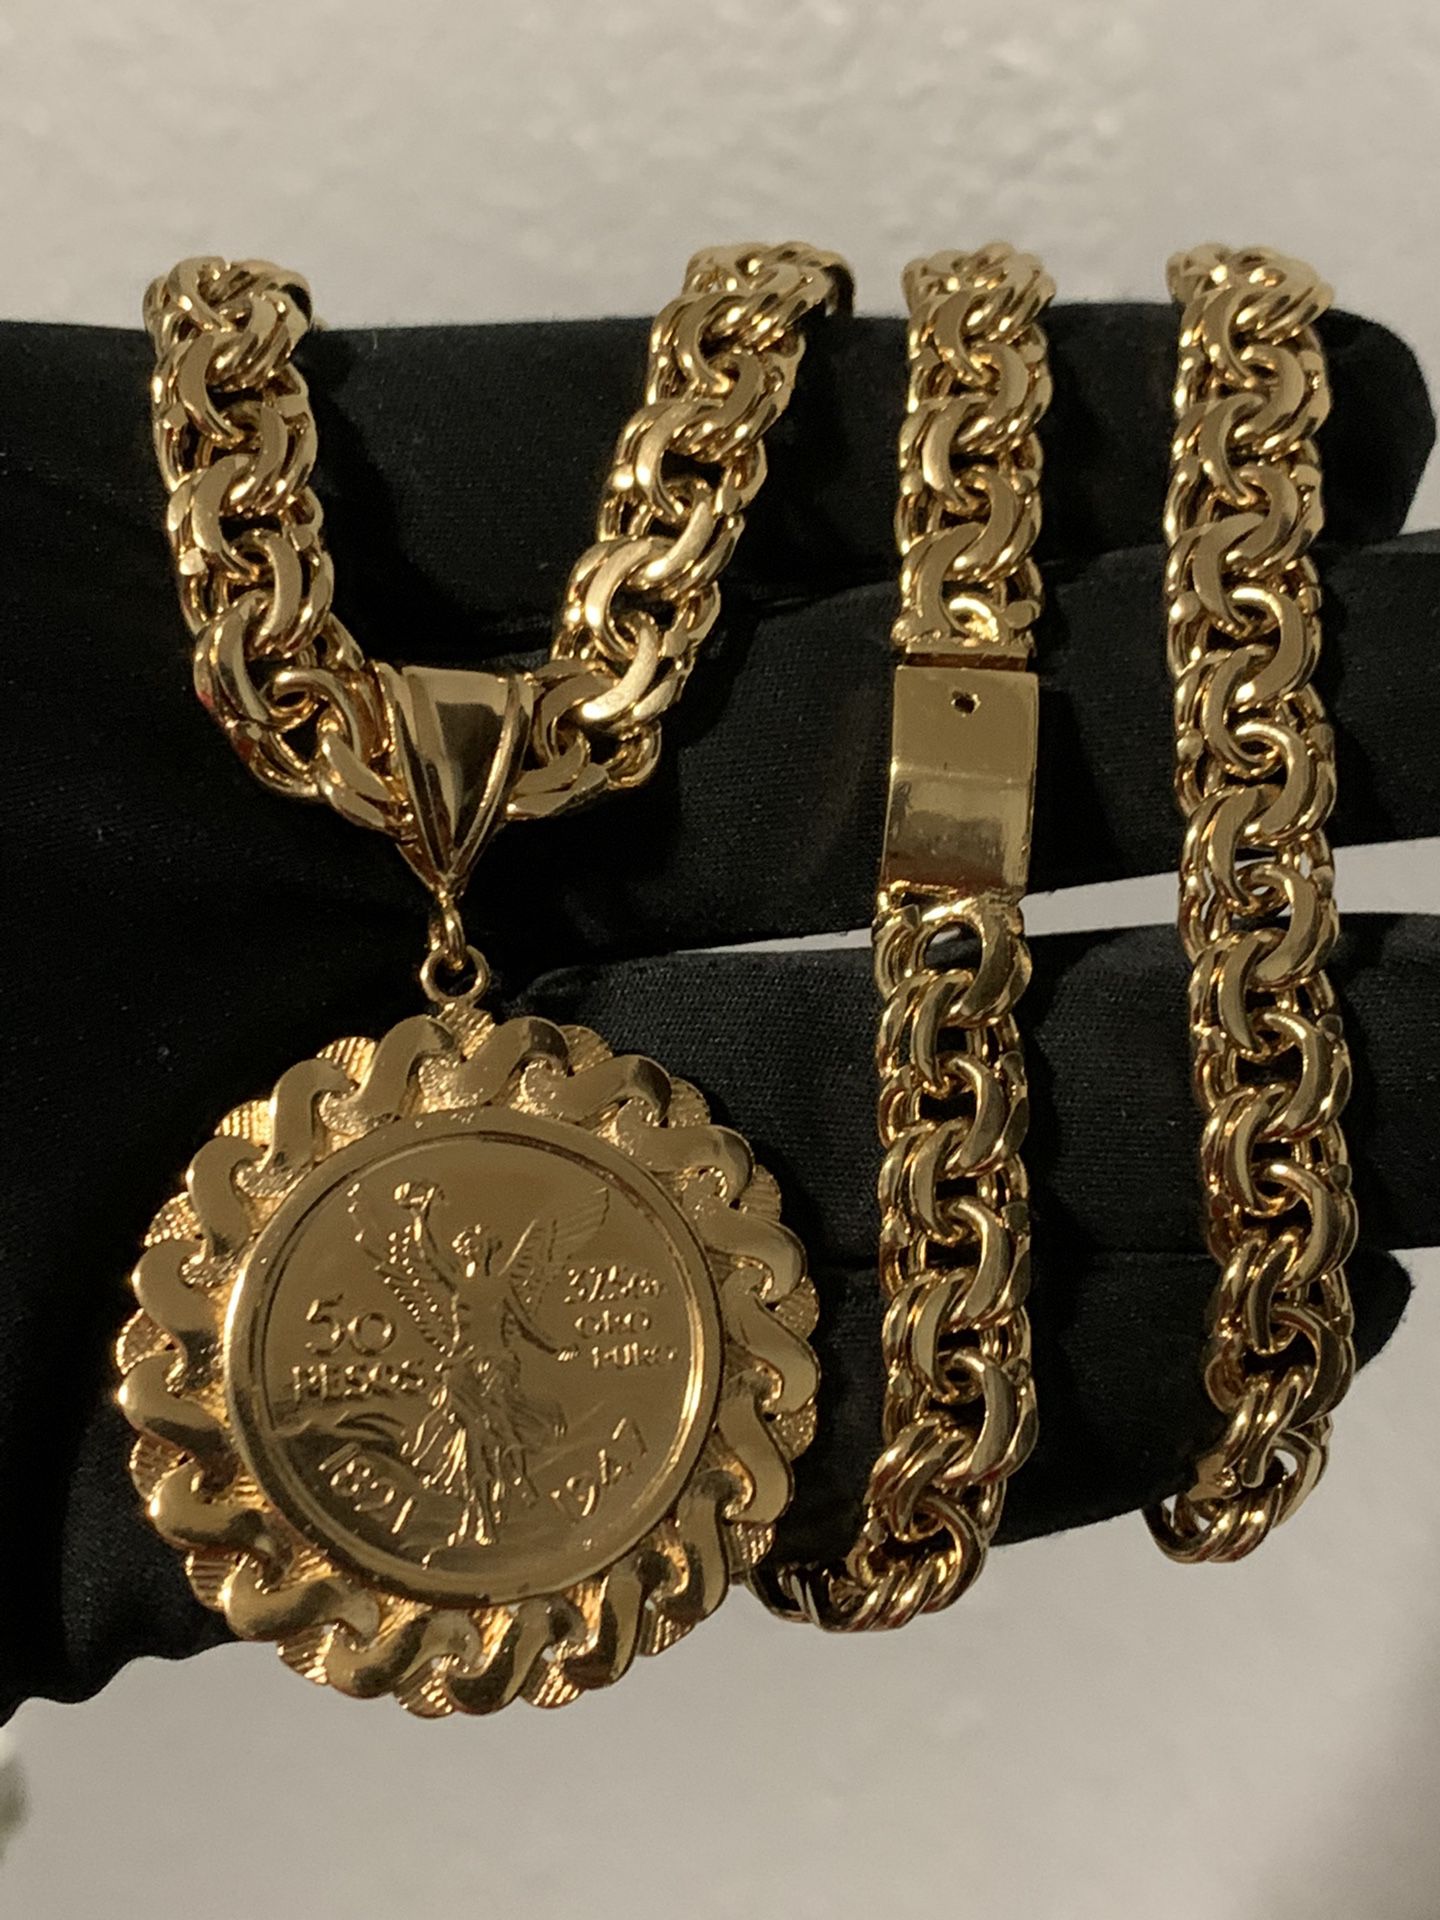 Louis Vuitton Chain Link Patches Necklace! for Sale in Conroe, TX - OfferUp